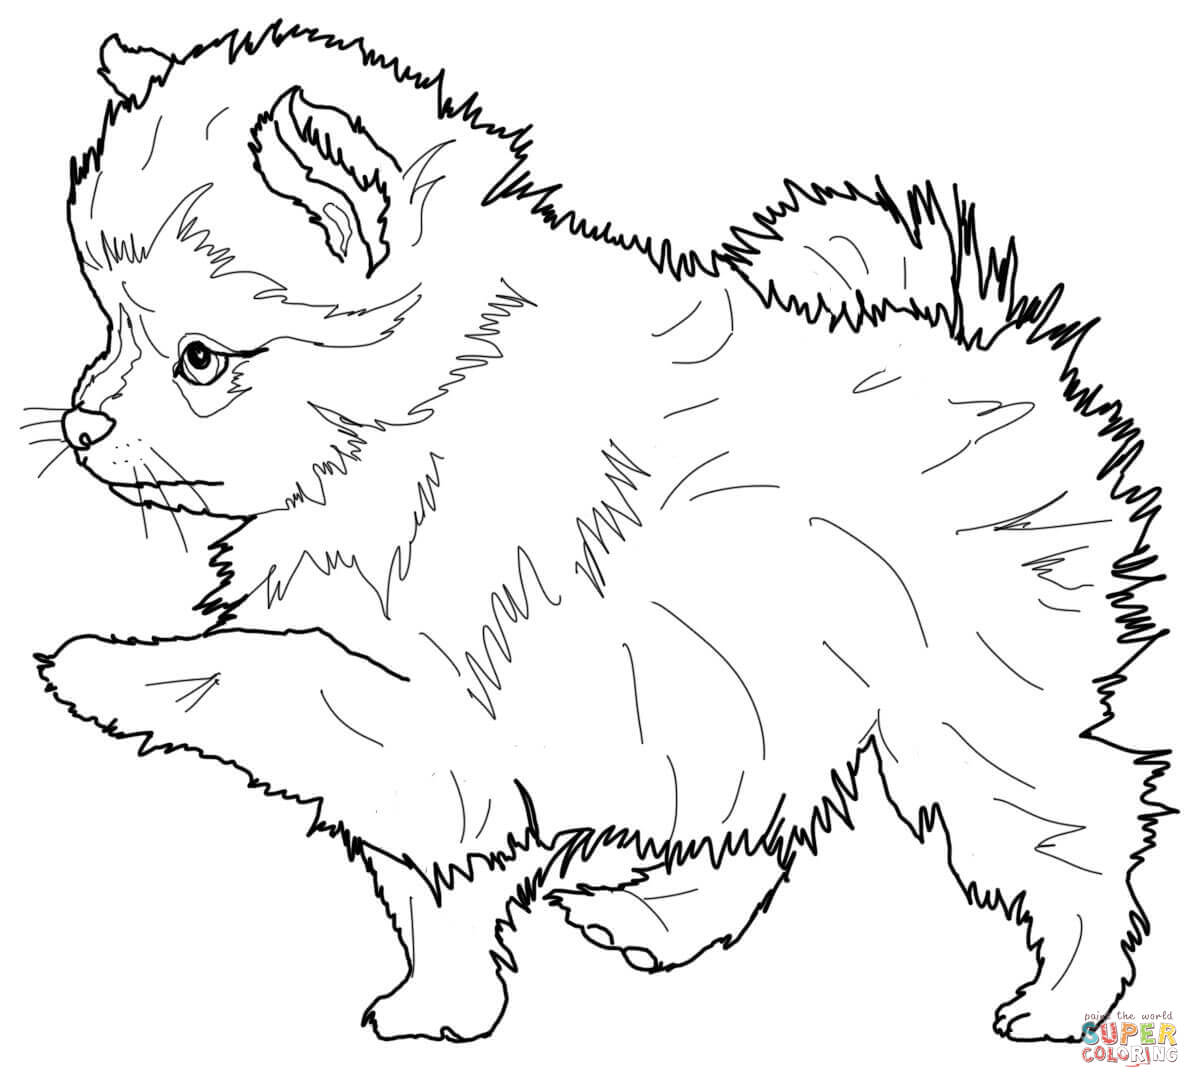 Husky Puppy - Coloring Pages for Kids and for Adults